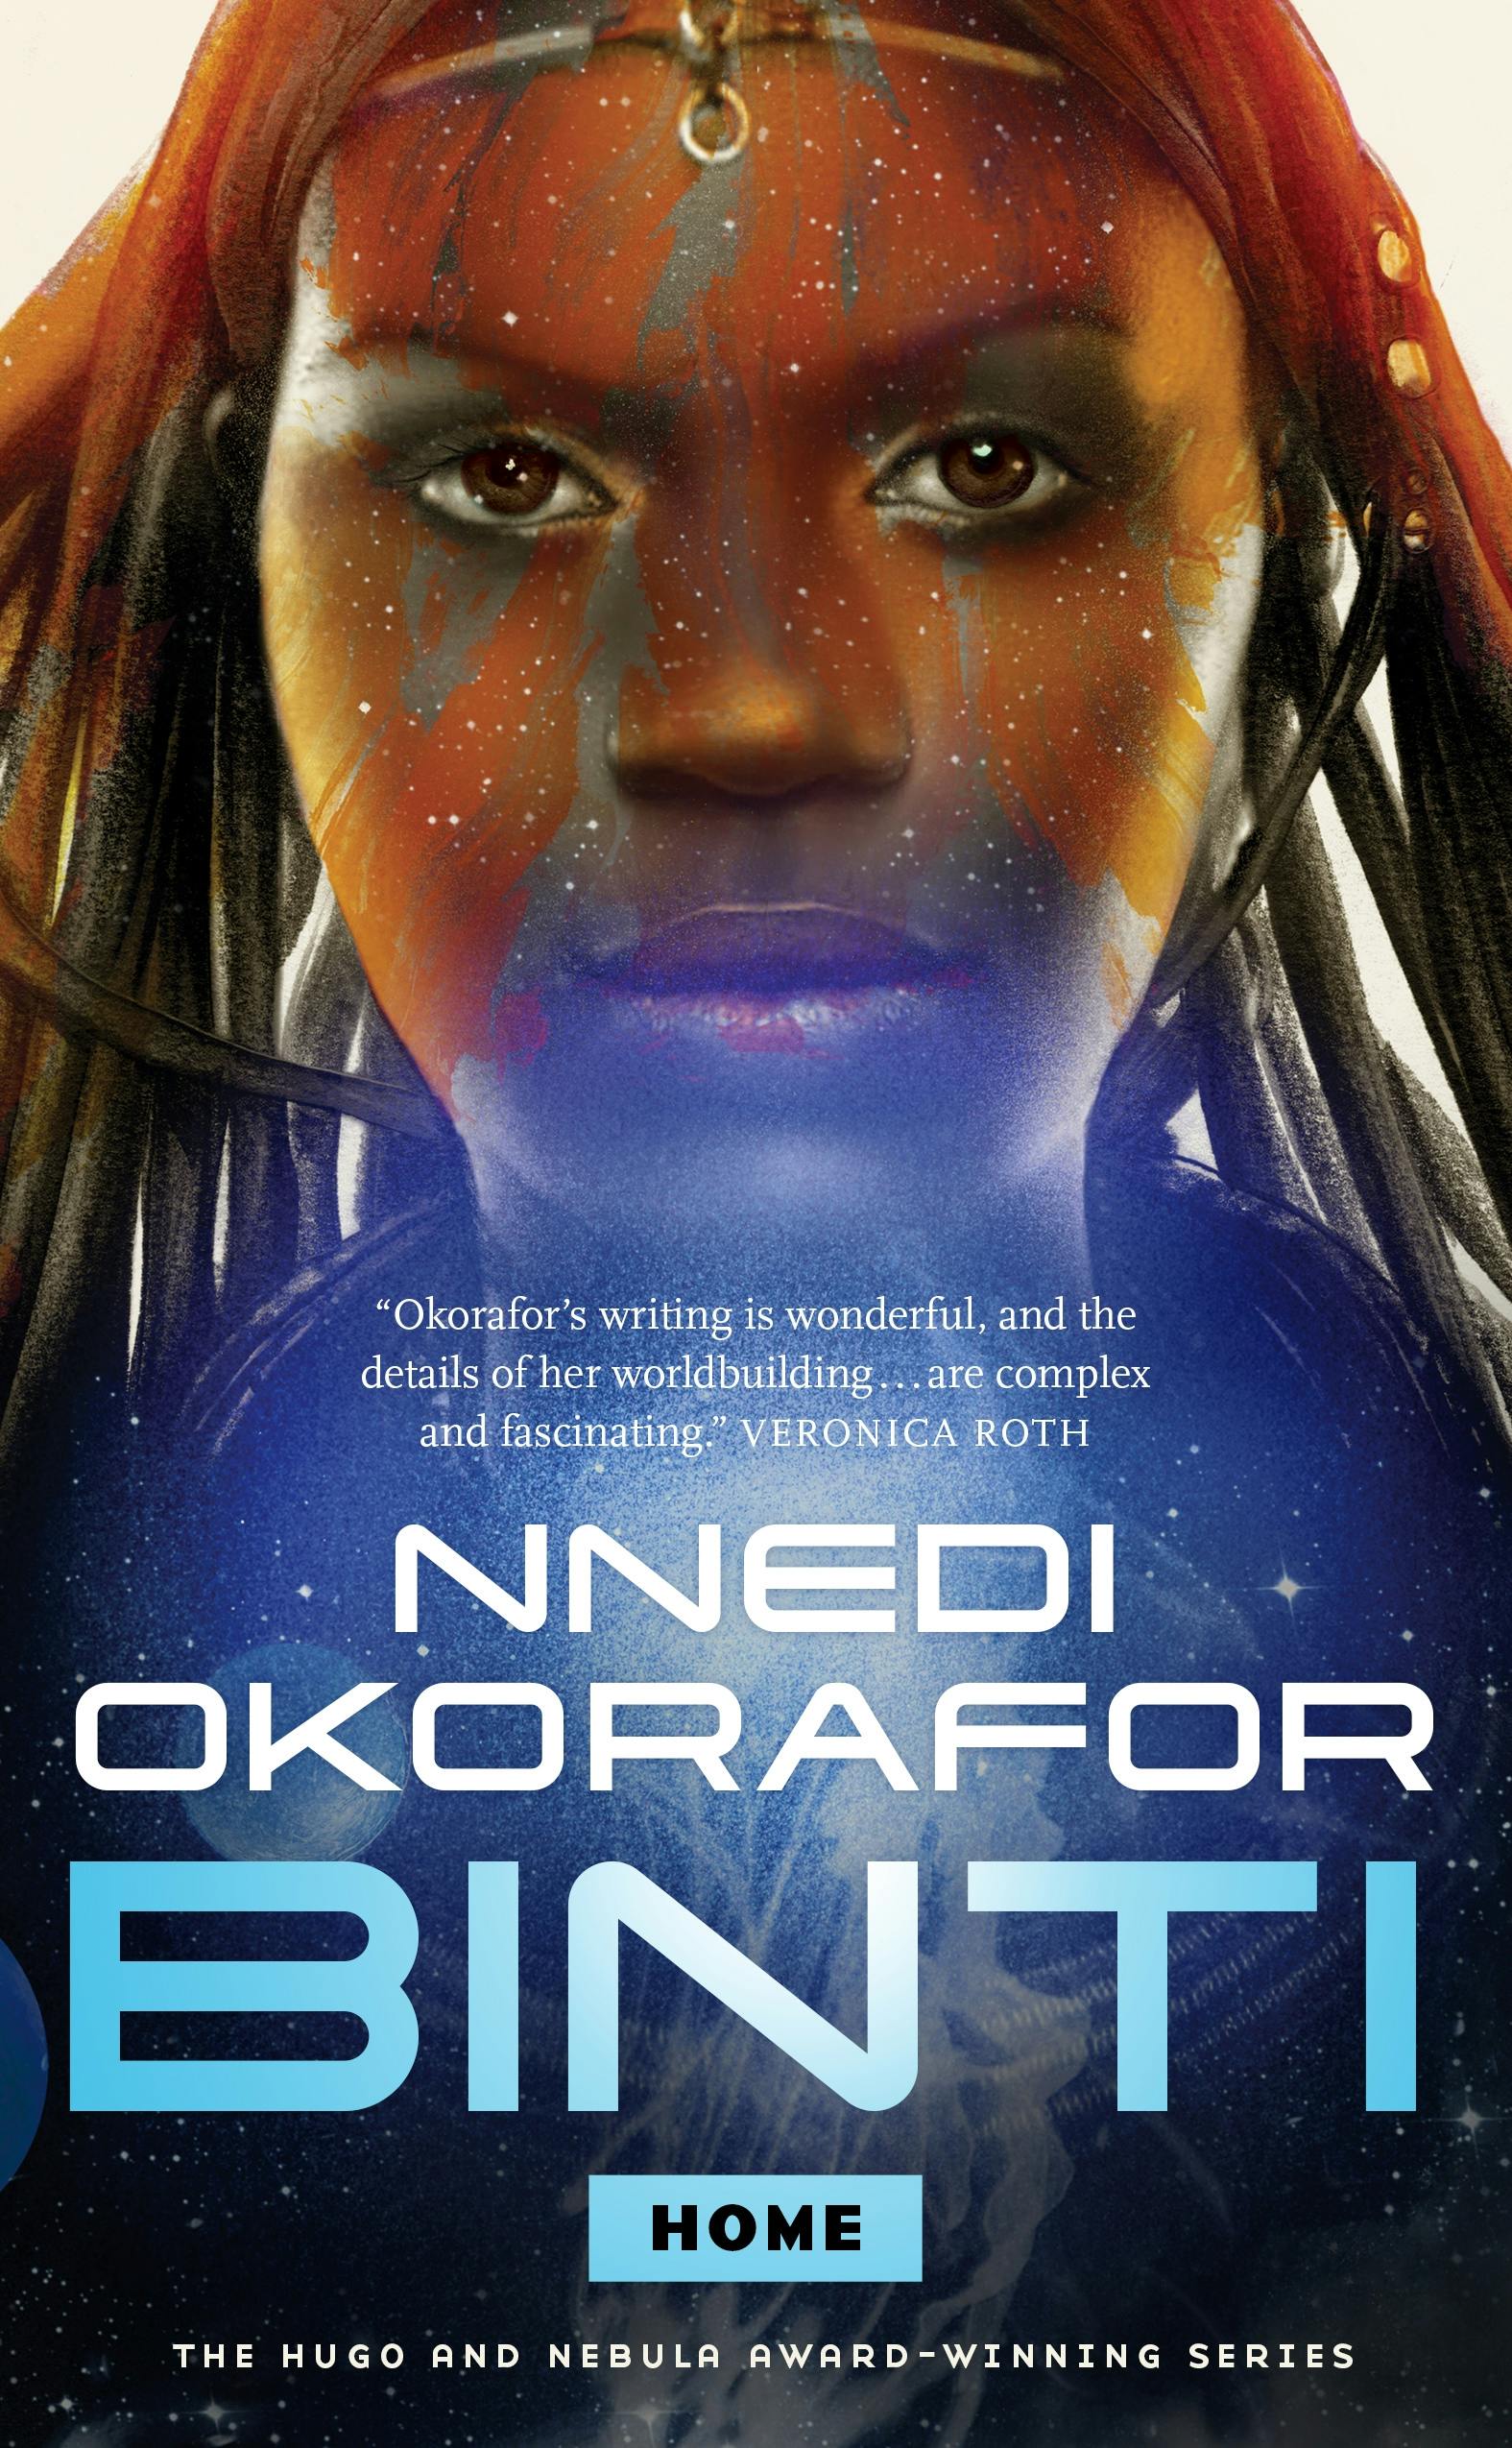 Cover for the book titled as: Binti: Home